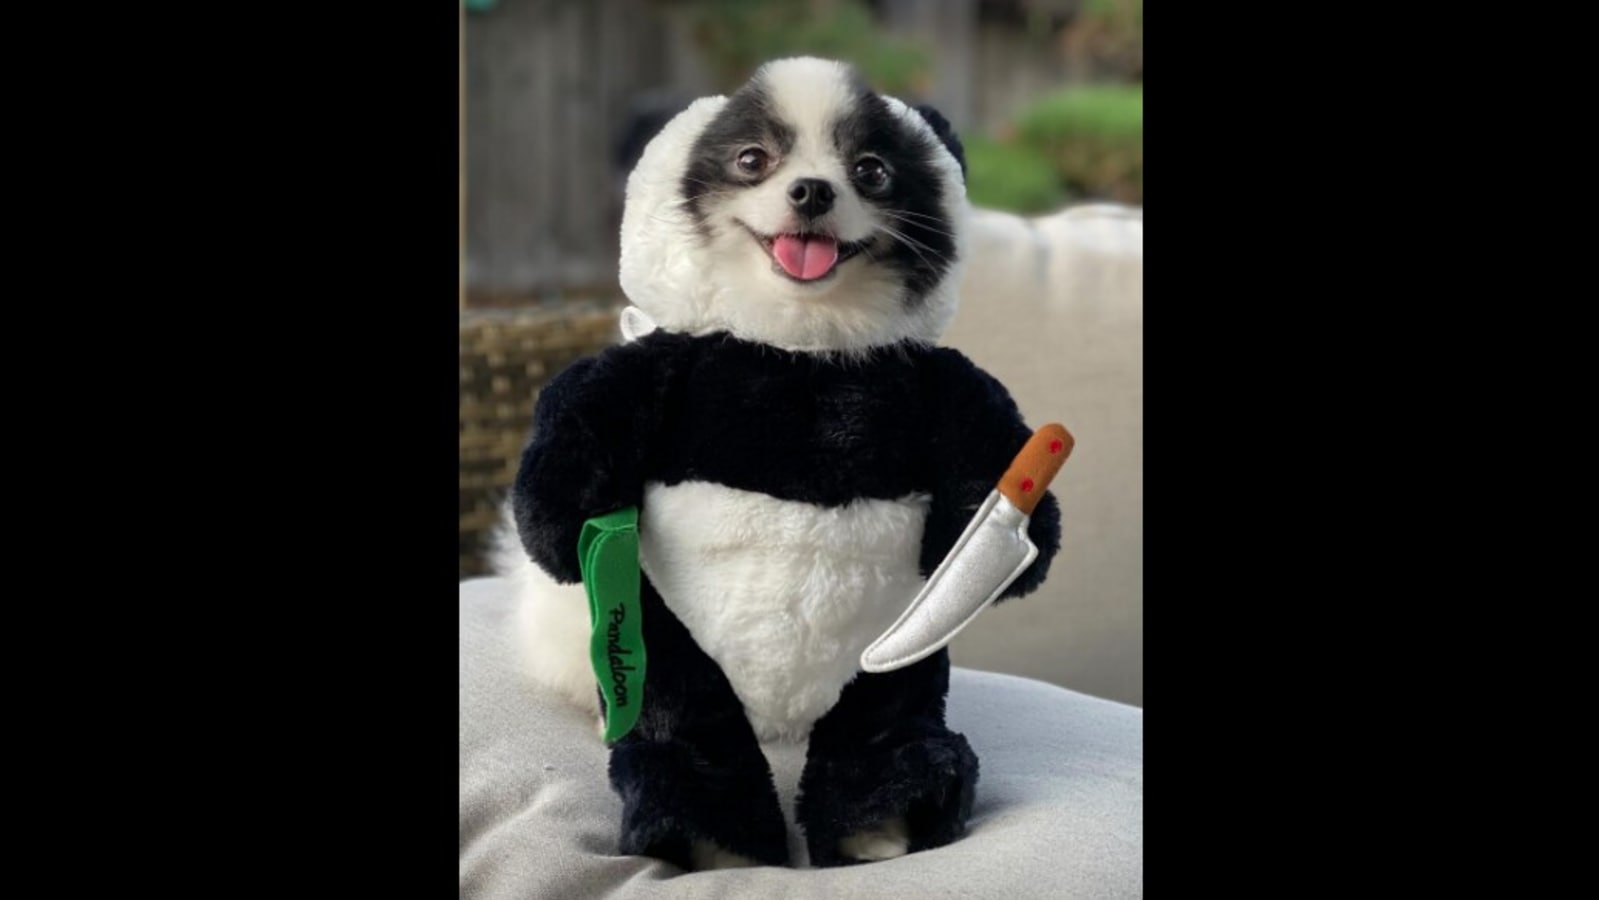 This 'terrifying' pet doggo is seen wearing a panda costume with a ...